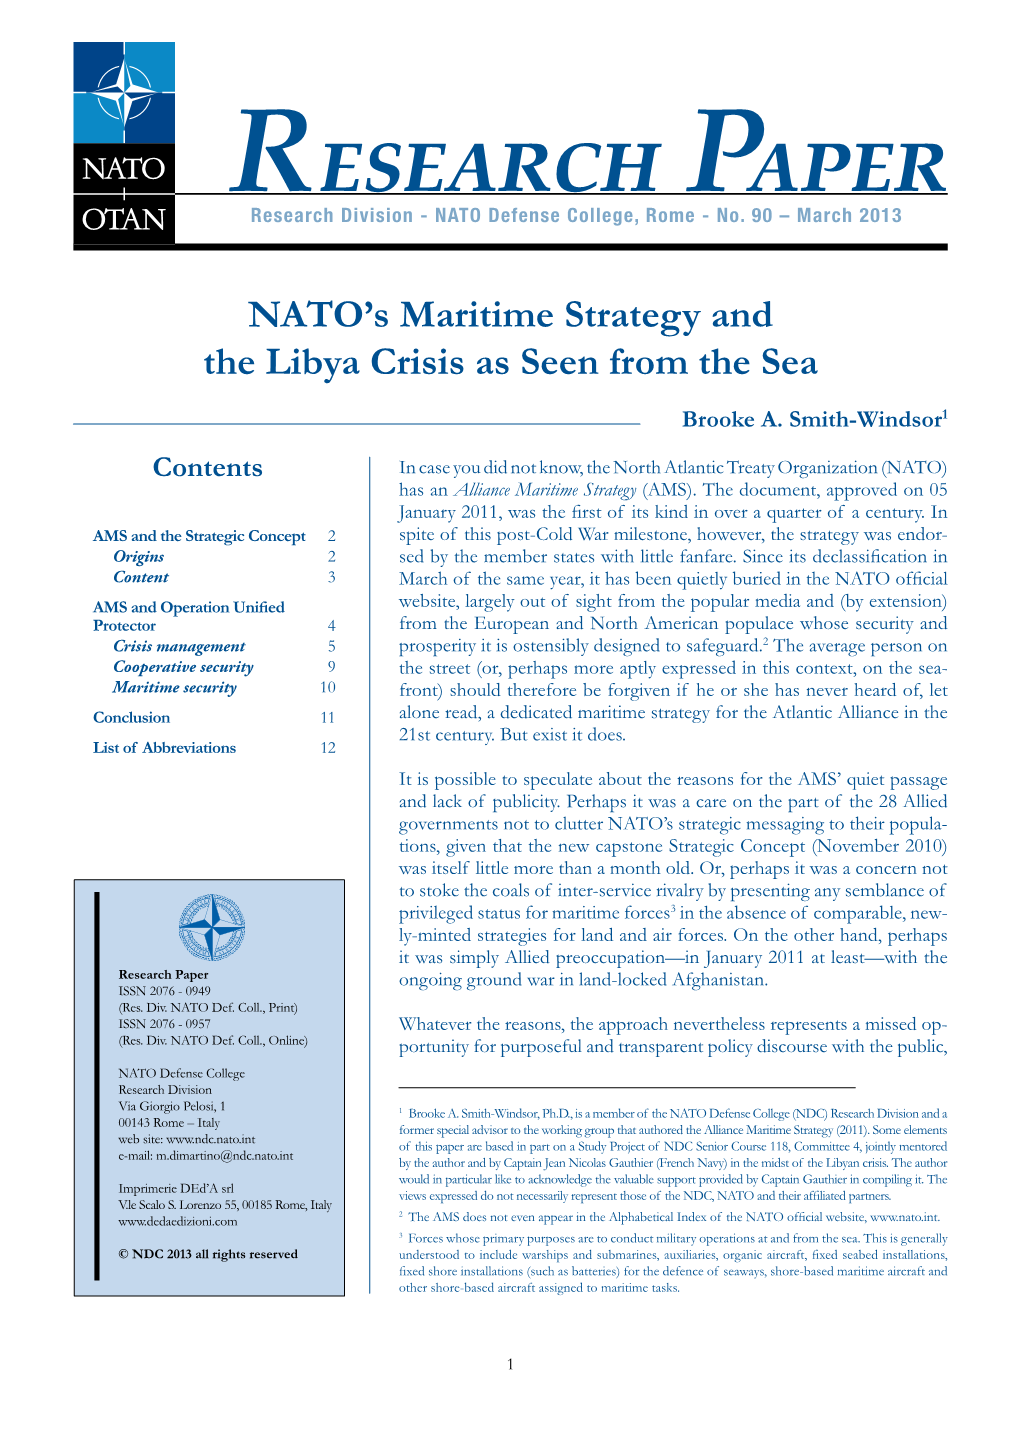 NATO's Maritime Strategy and the Libya Crisis As Seen from The